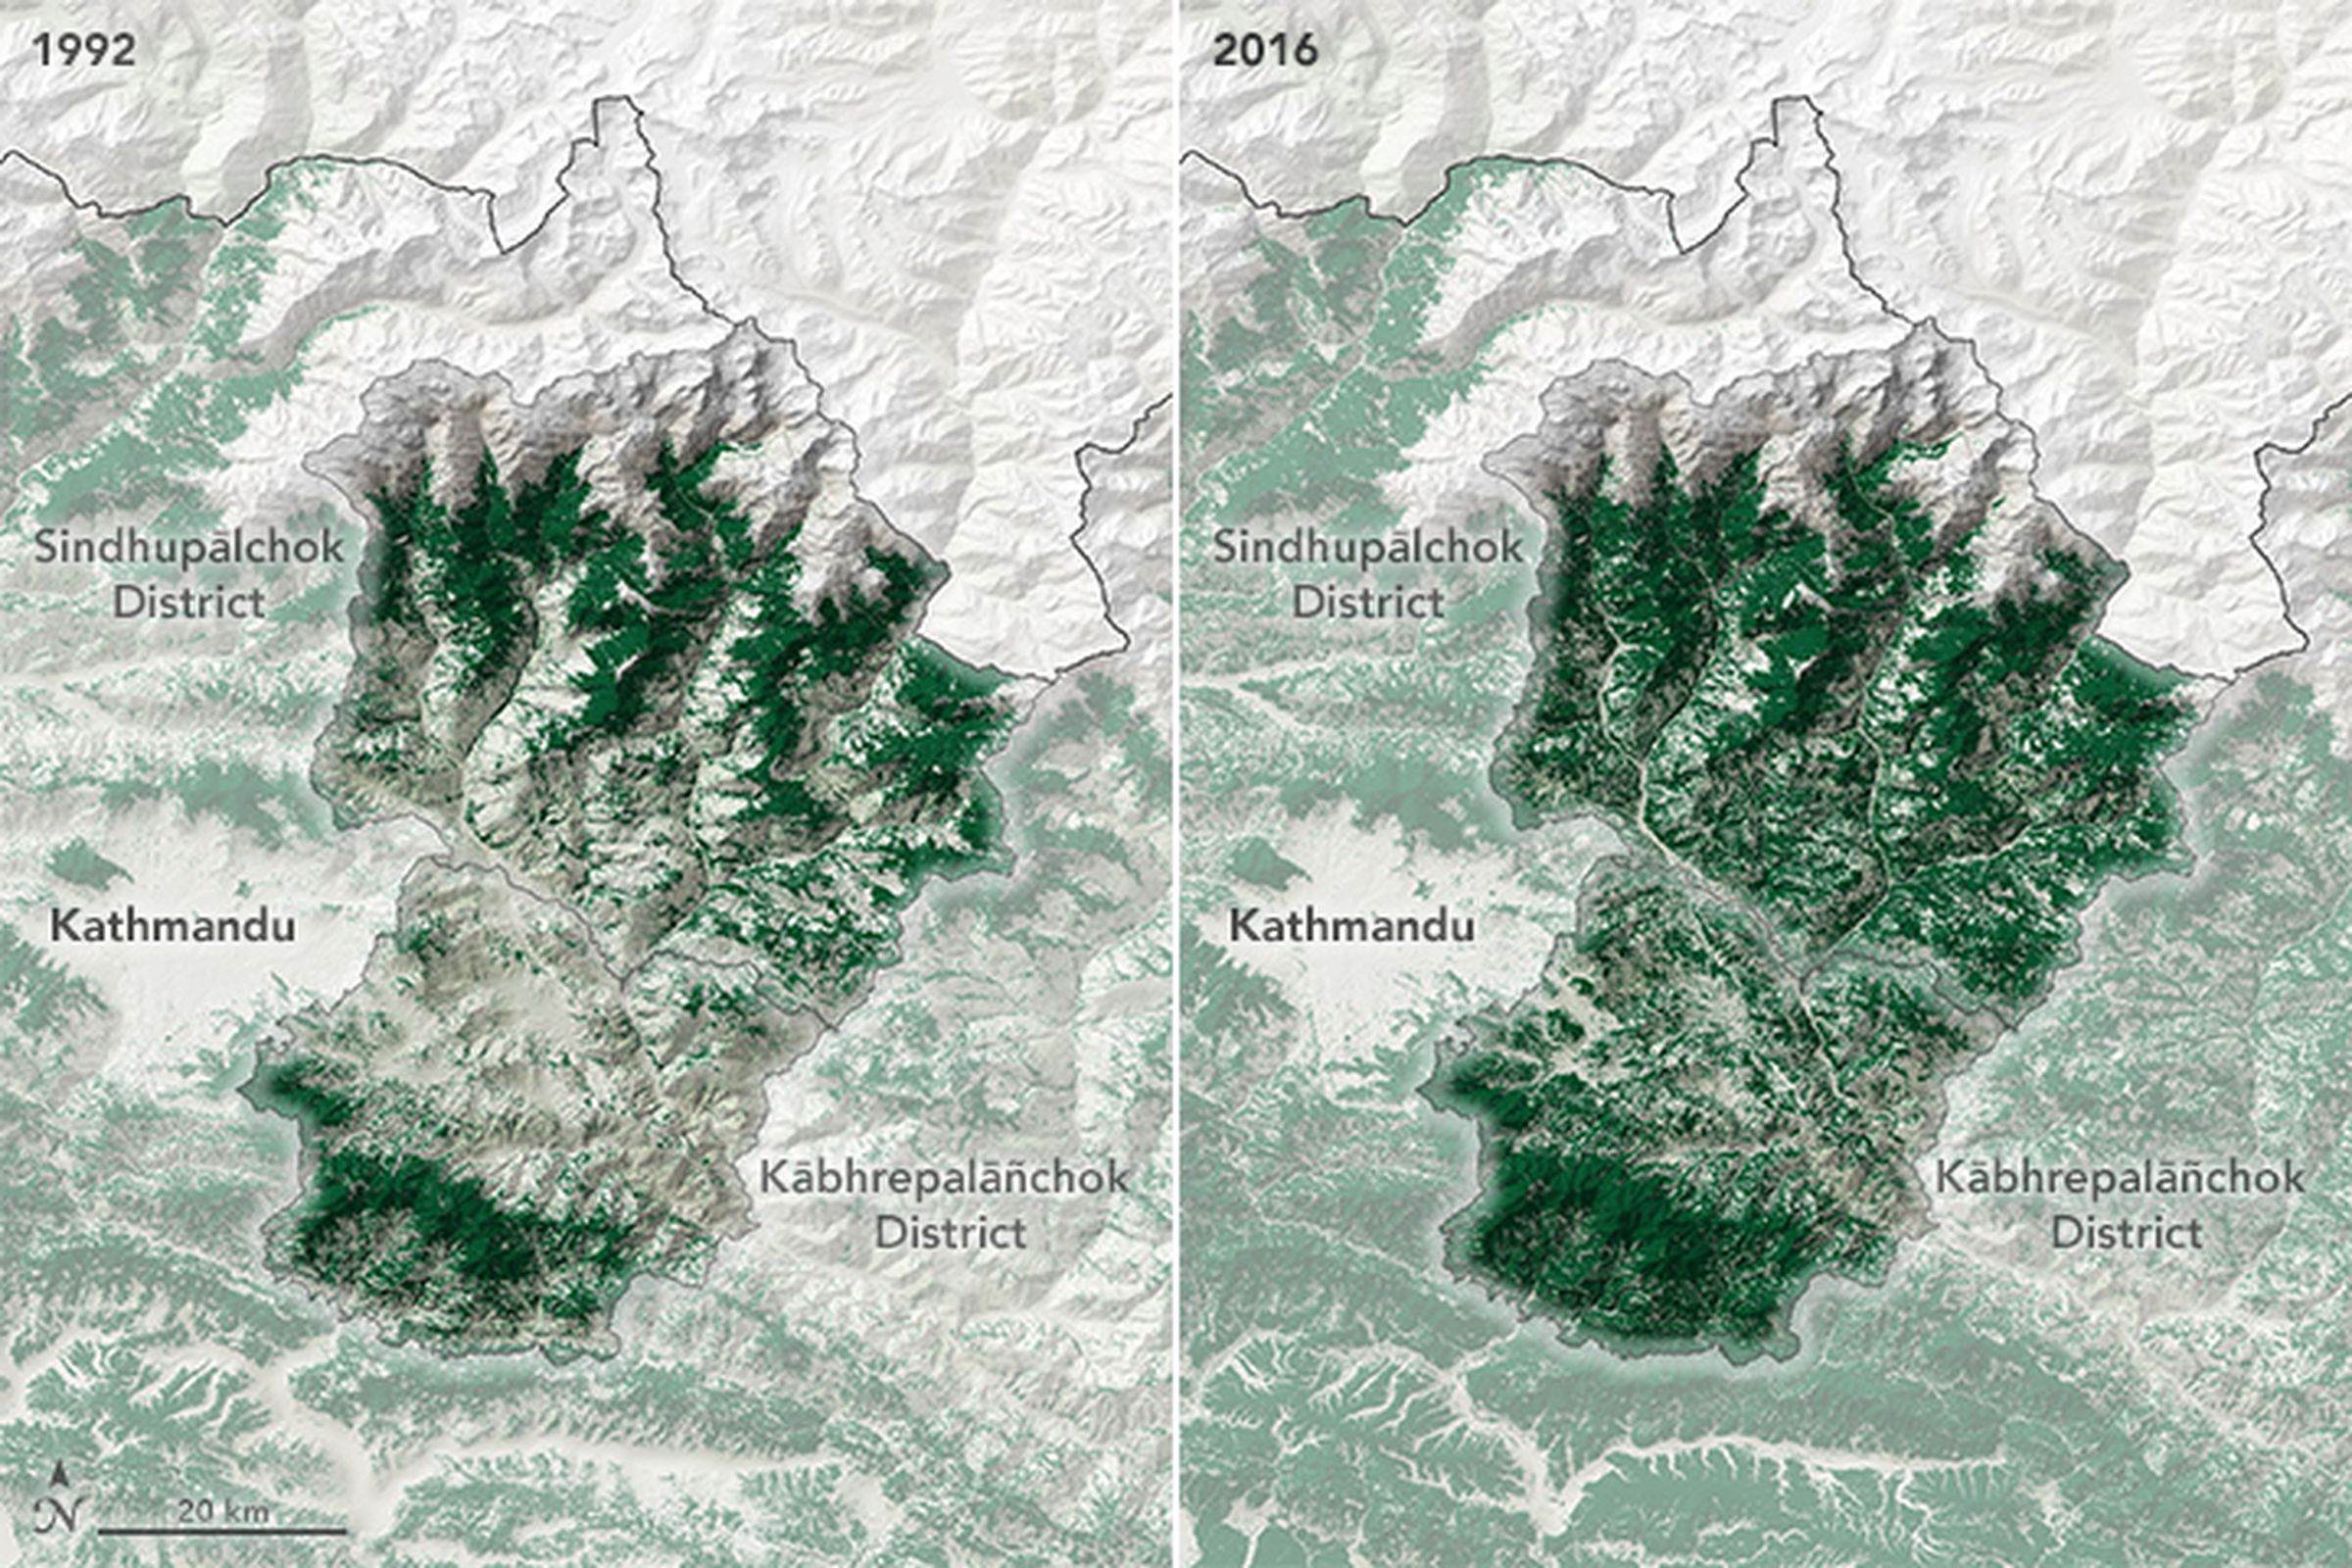 One map on the left shows a region spotted with green, indicating dwindling forest cover in 1992. A map on the right shows the area colored in with much more dark green, indicating increased forest cover in 2016.